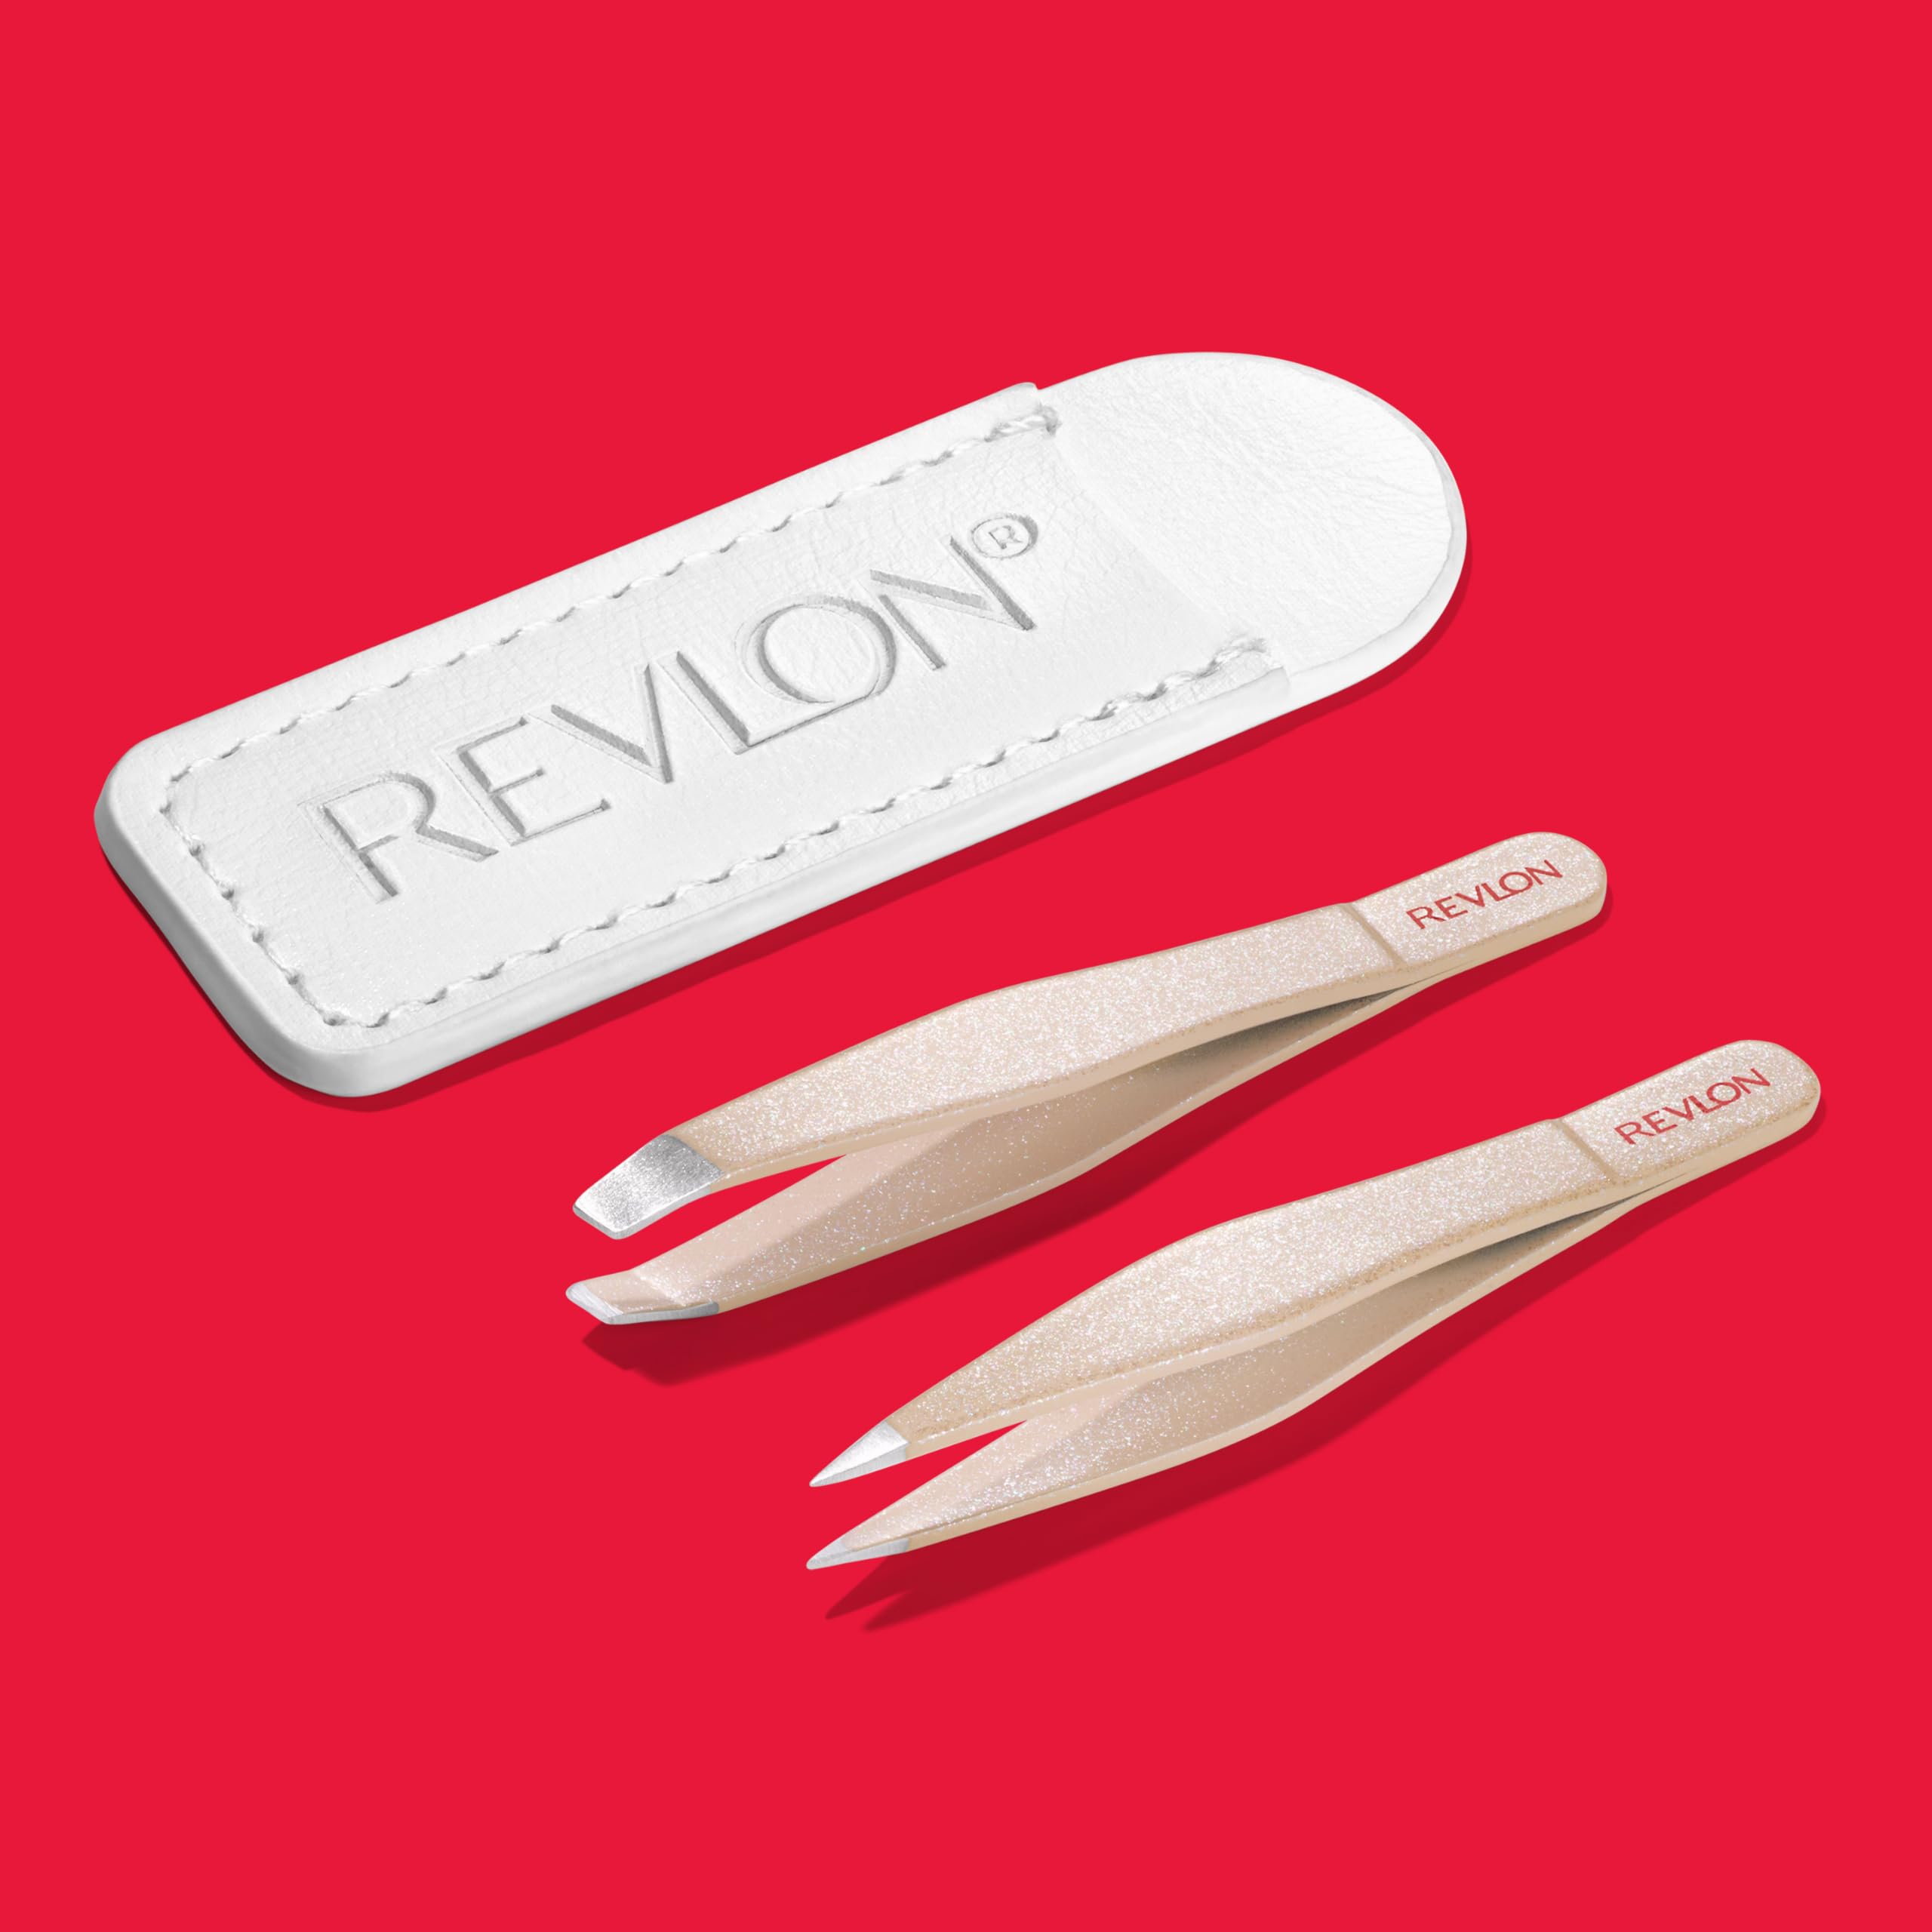 Revlon Designer Series Mini Tweezer Set, Hair Removal Tool Kit with Mini Slant-tip and Point Tip Tweezers, Portable and Easy to Use Made with Long Lasting Stainless Steel, 1 Count